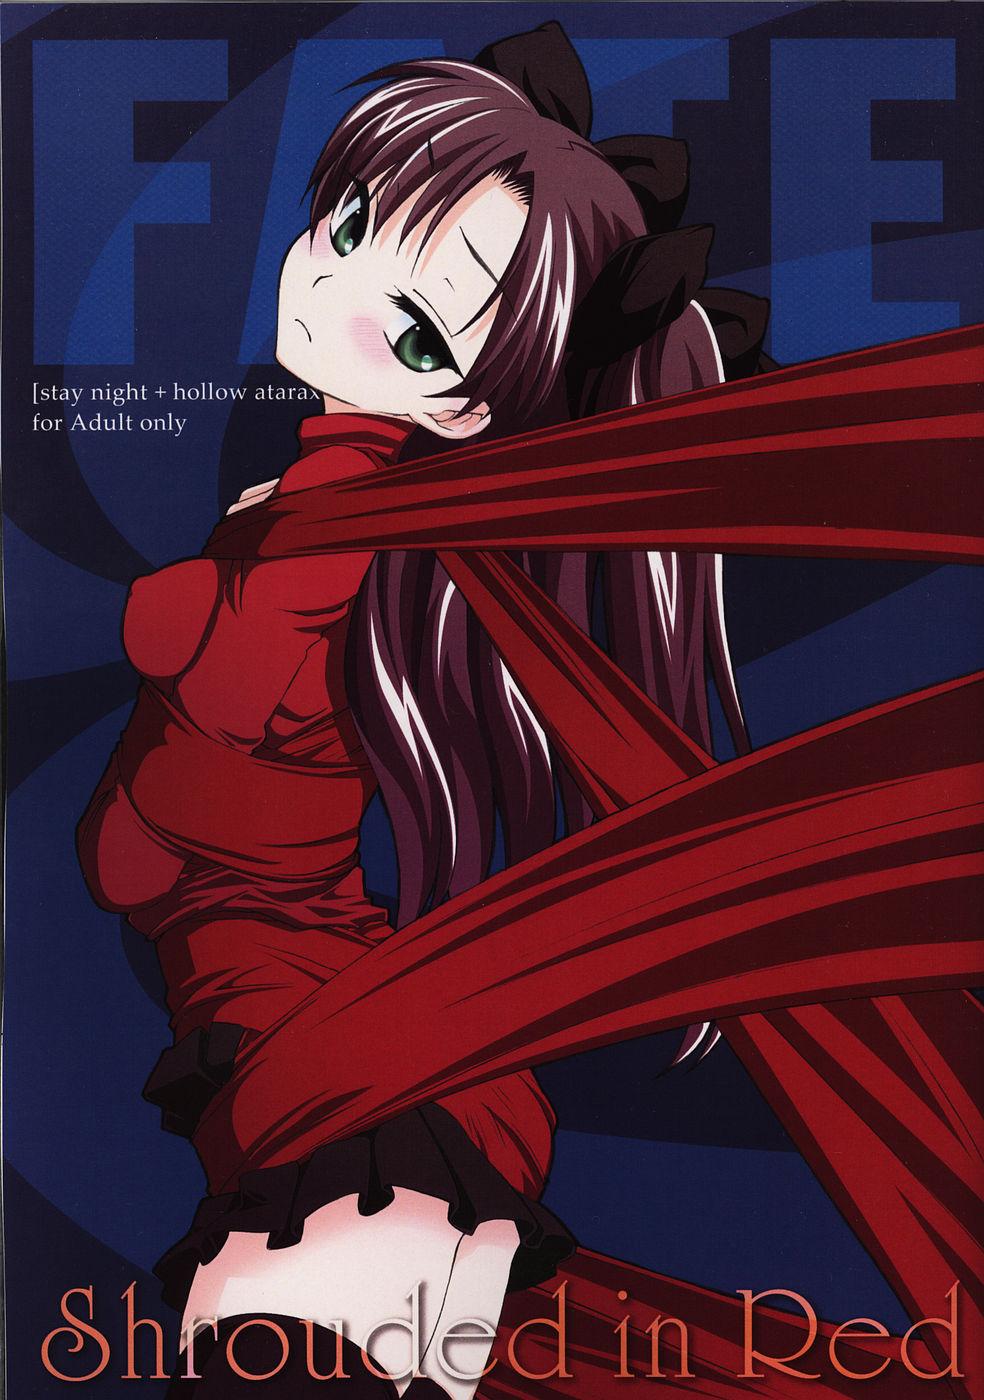 Teen Blowjob Shrouded in Red - Fate stay night Bribe - Picture 1